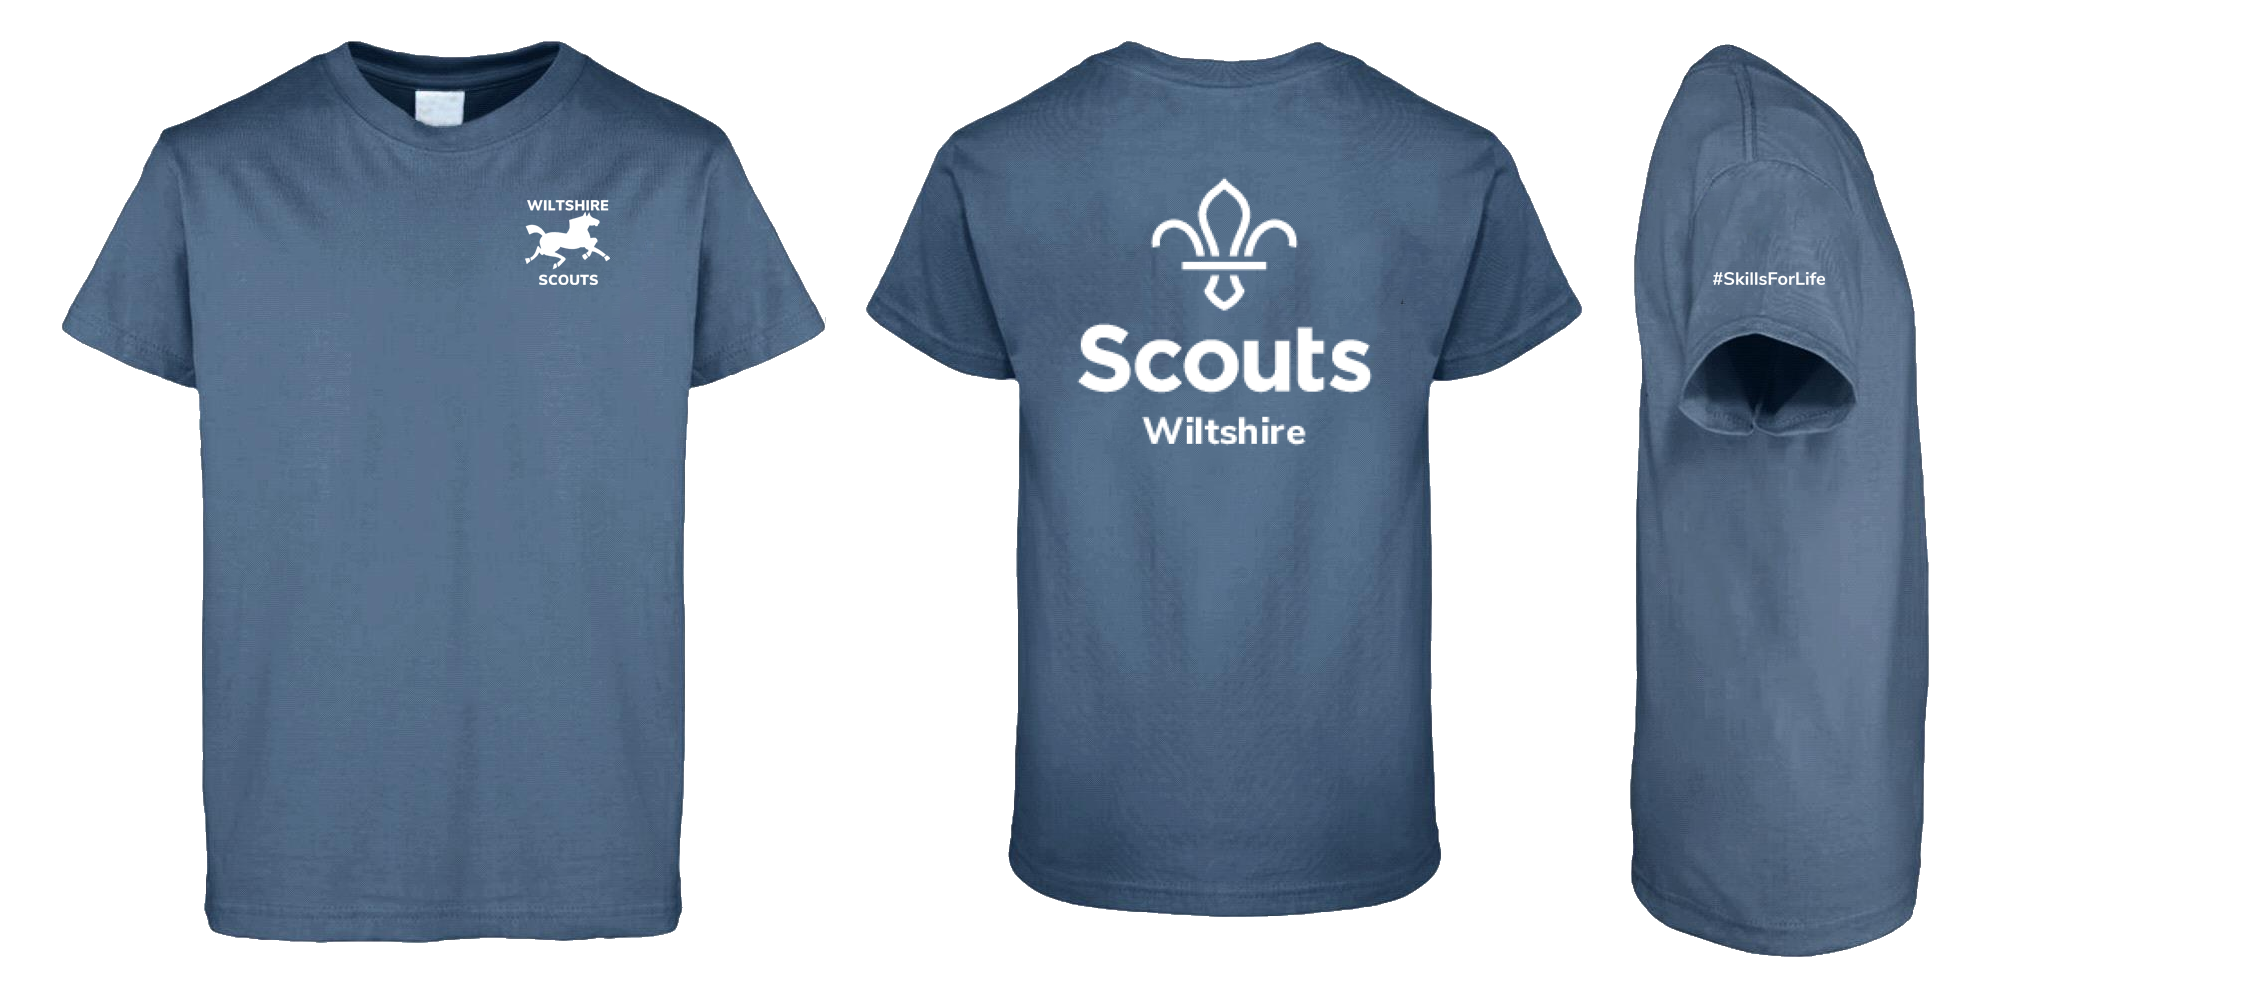 Wiltshire Scouts T Shirt